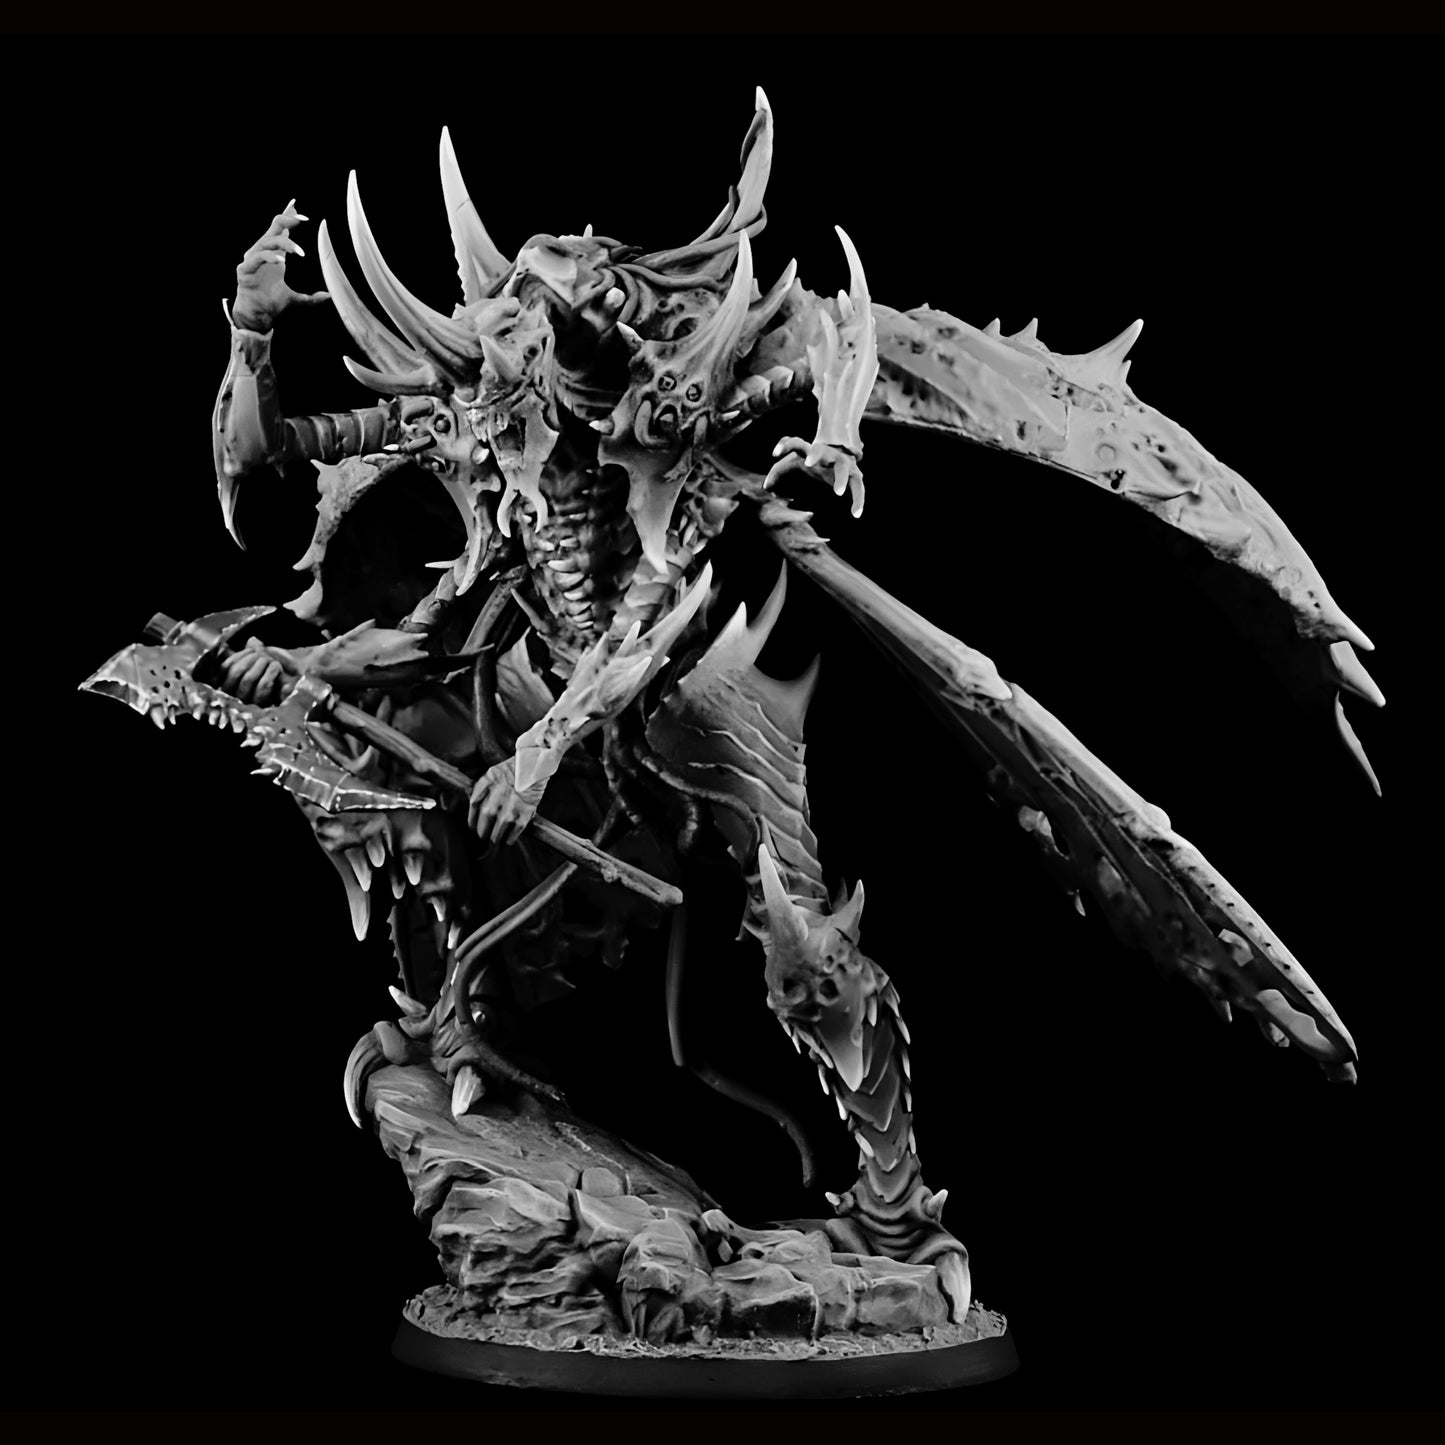 18+ Collector's 3D Printed Model: Resin Figure Model Kit Unassambled 127mm ancient fantasy warrior stand with base. Unpainted collect Figure Building Kit